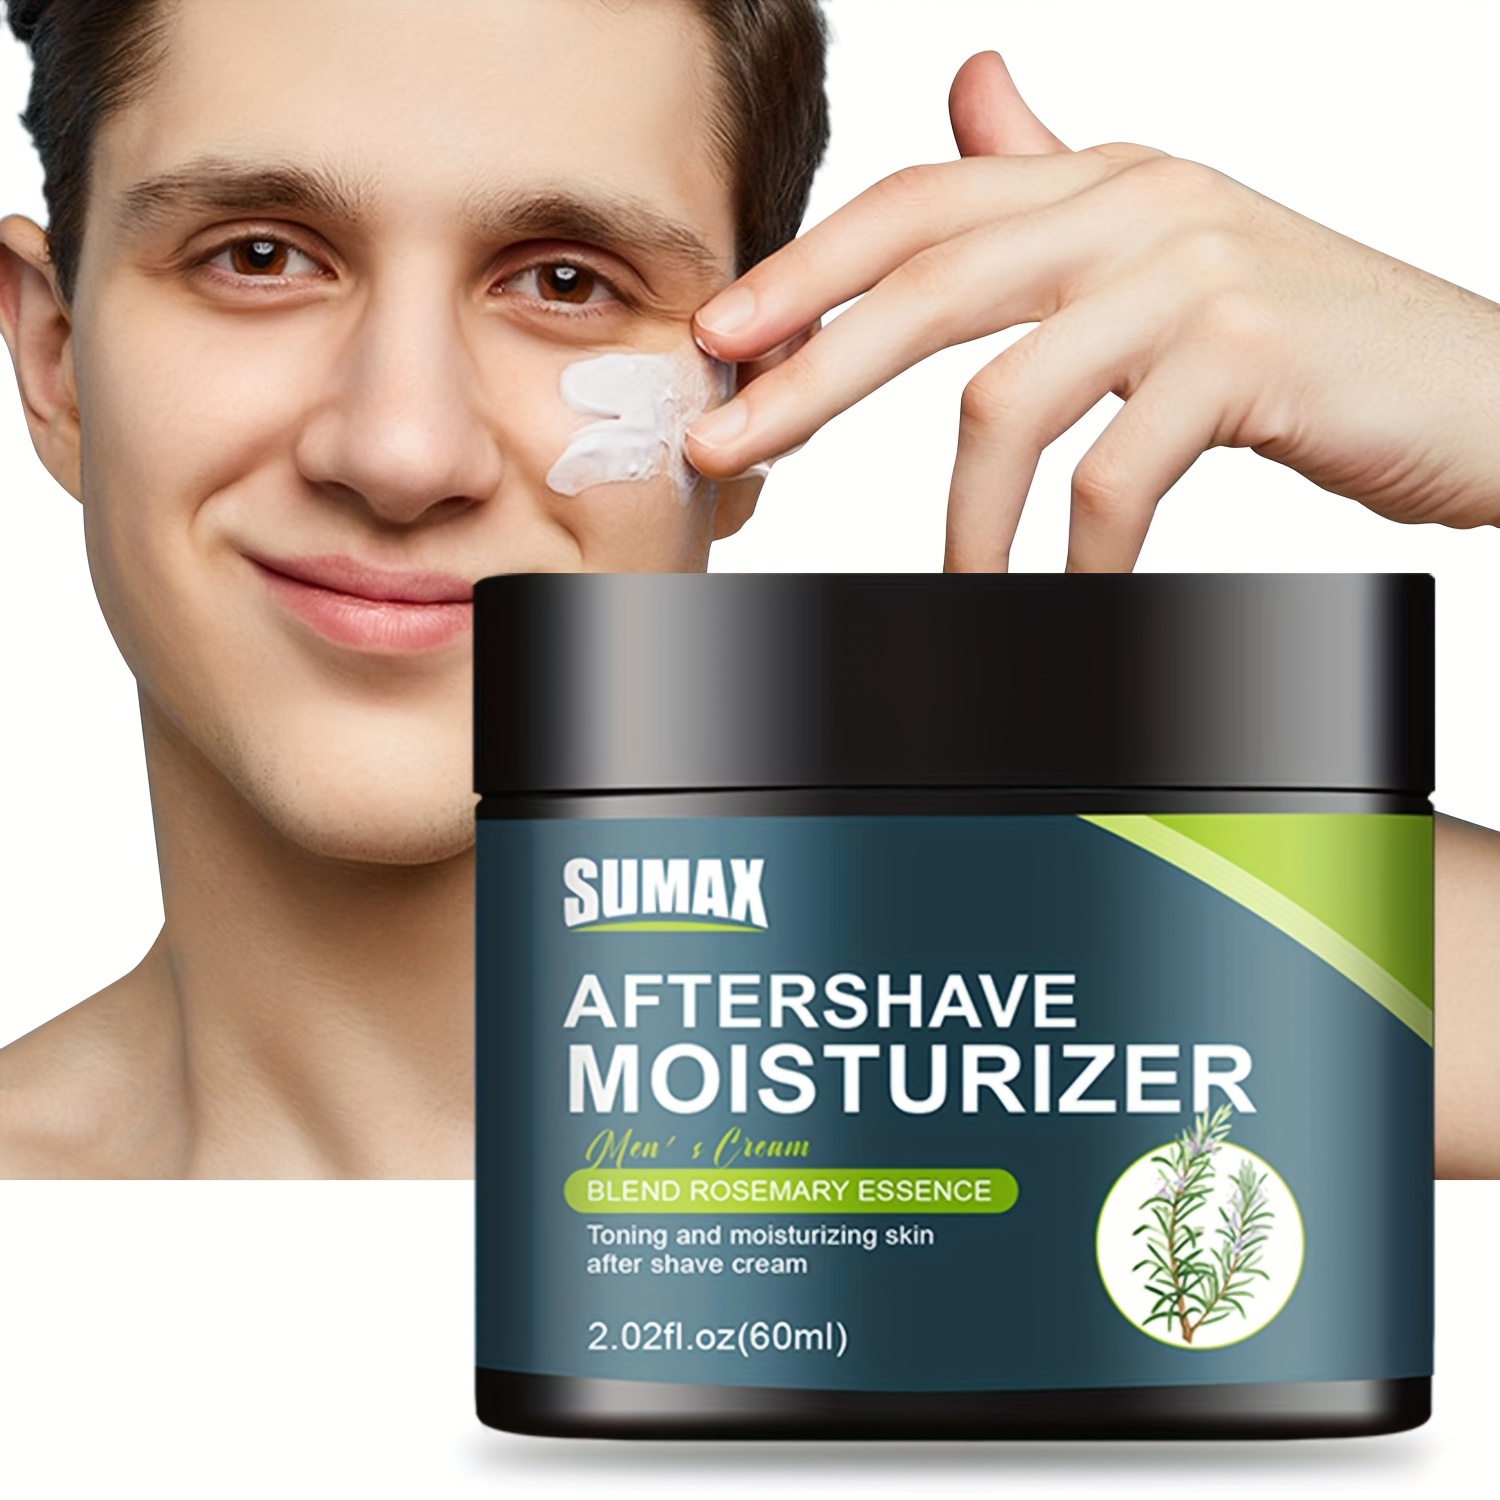 

Men's After-shave Moisturizer With Rosemary Extract - 2.02 Fl Oz, Alcohol-free, Hyaluronic Acid Infused For Deep Hydration & Cleansing